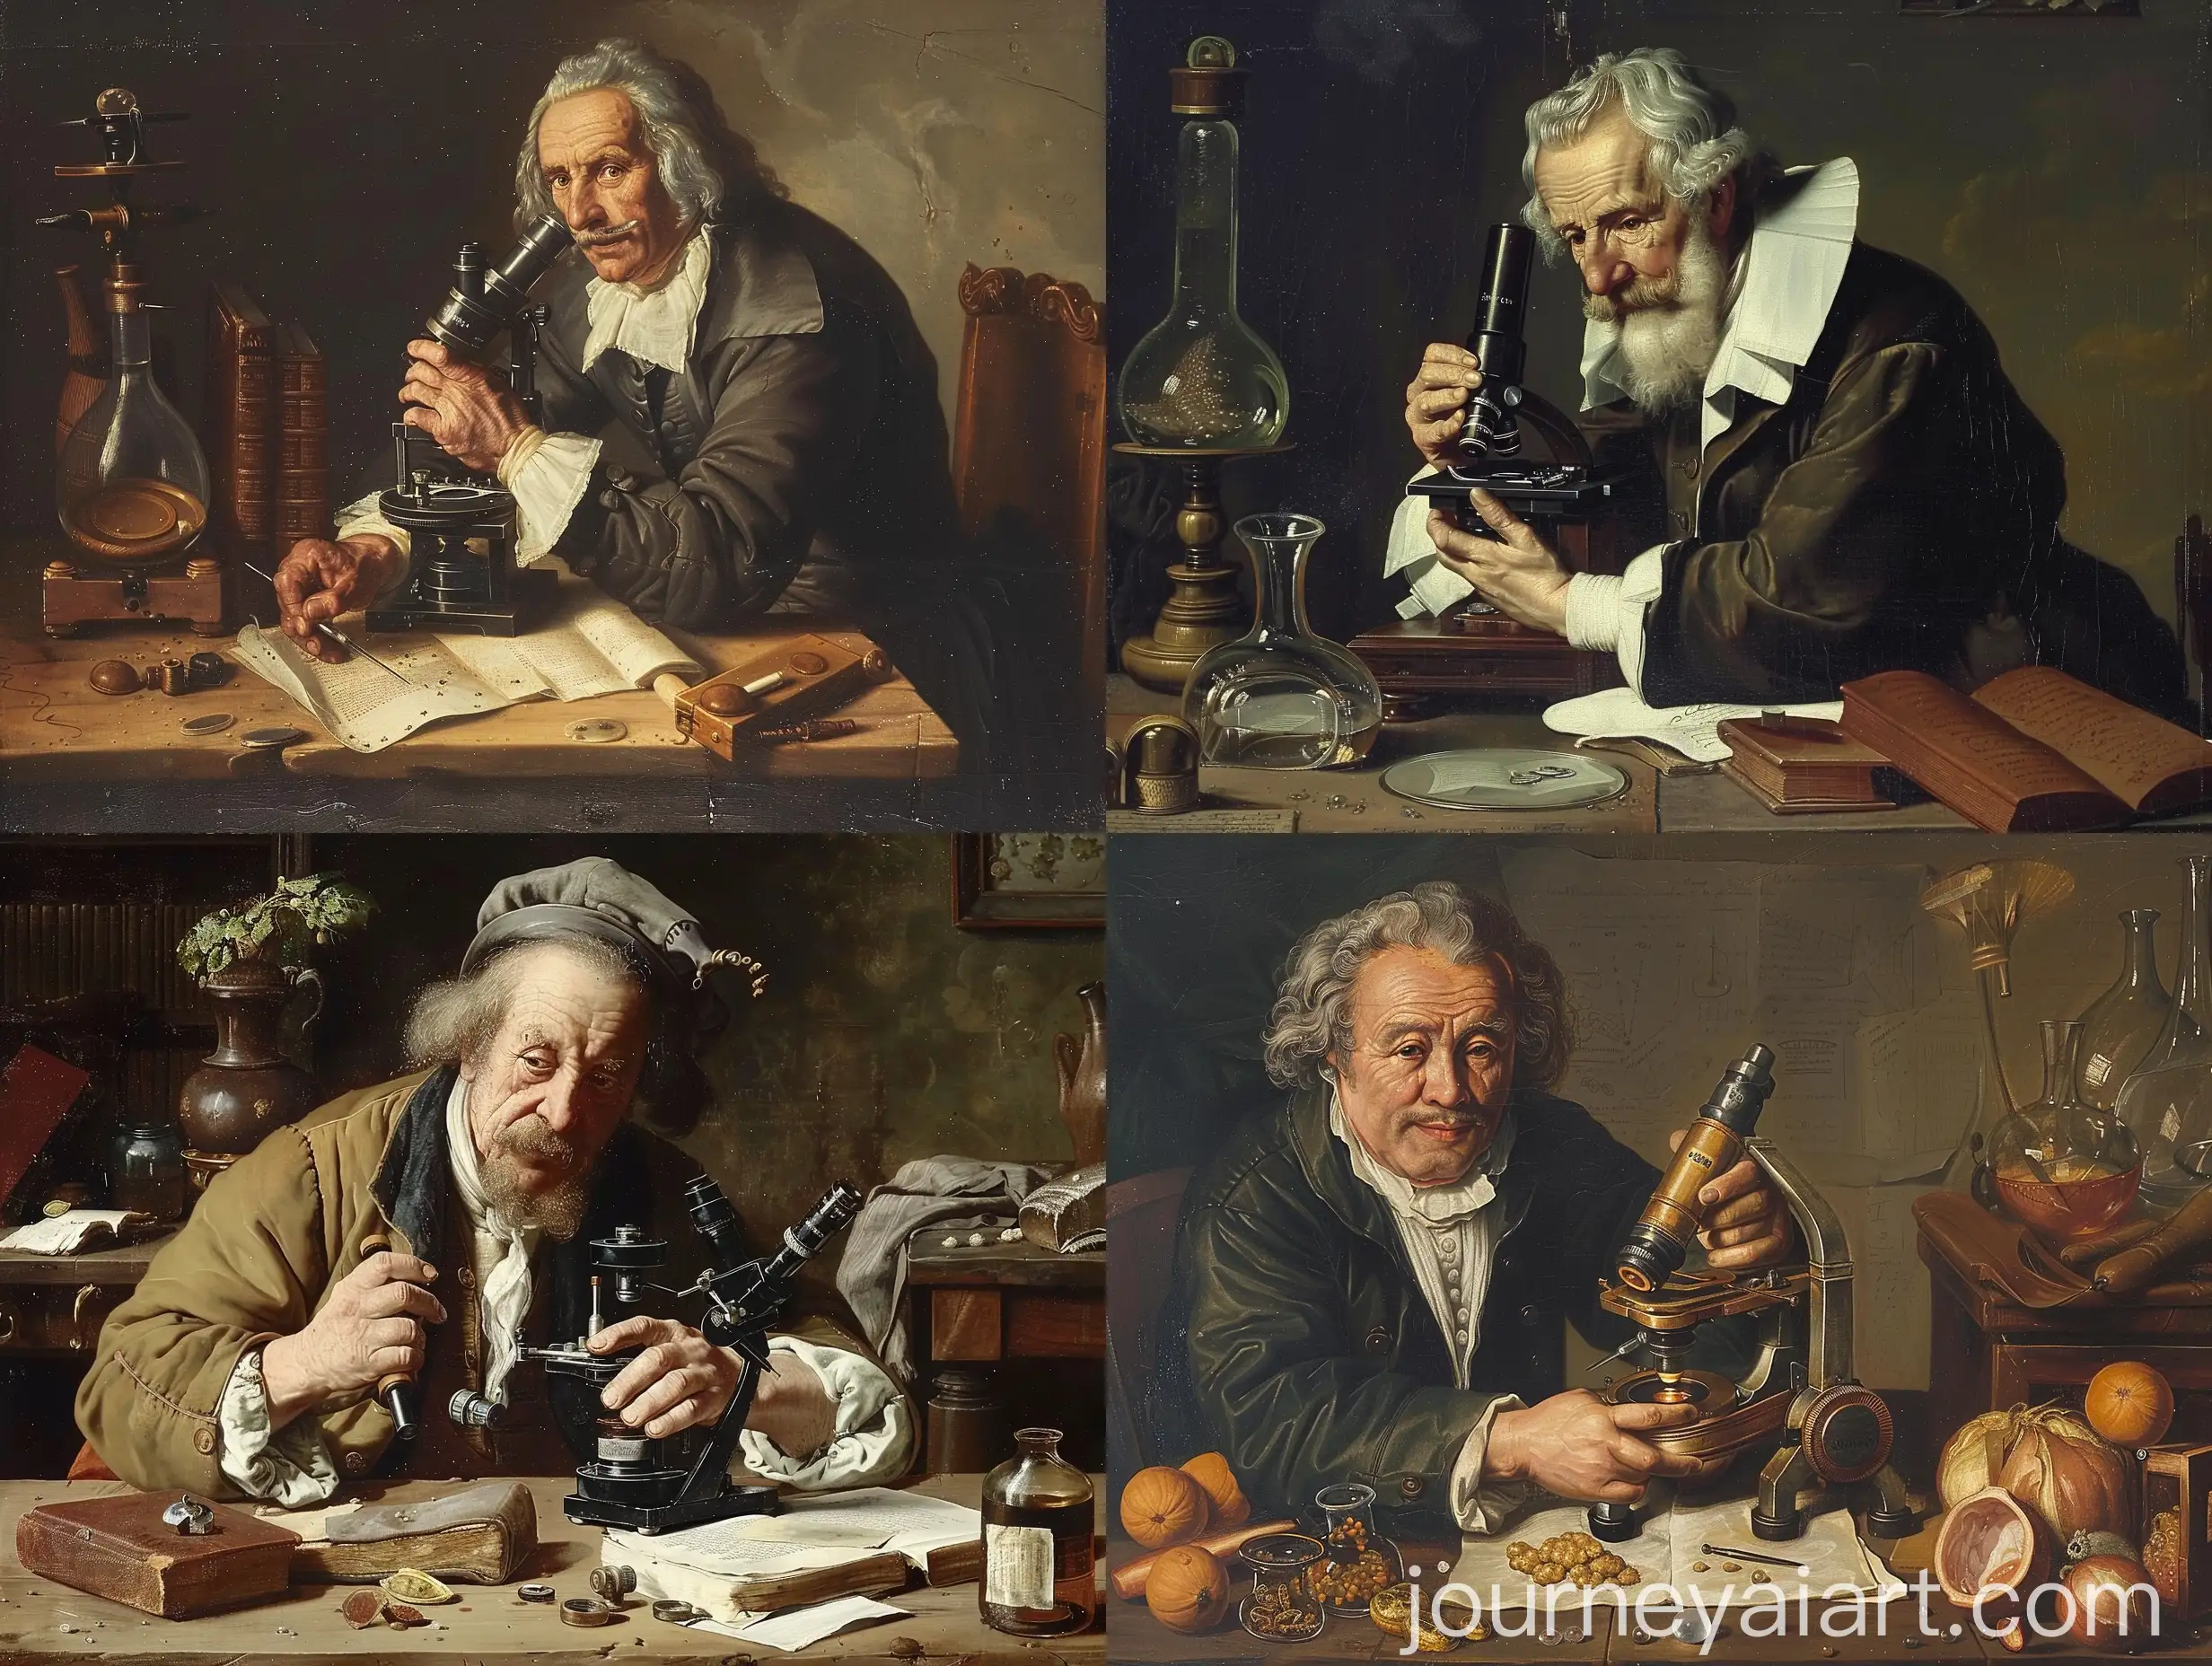 17th-Century-Naturalist-Examining-Specimens-with-a-Vintage-Microscope